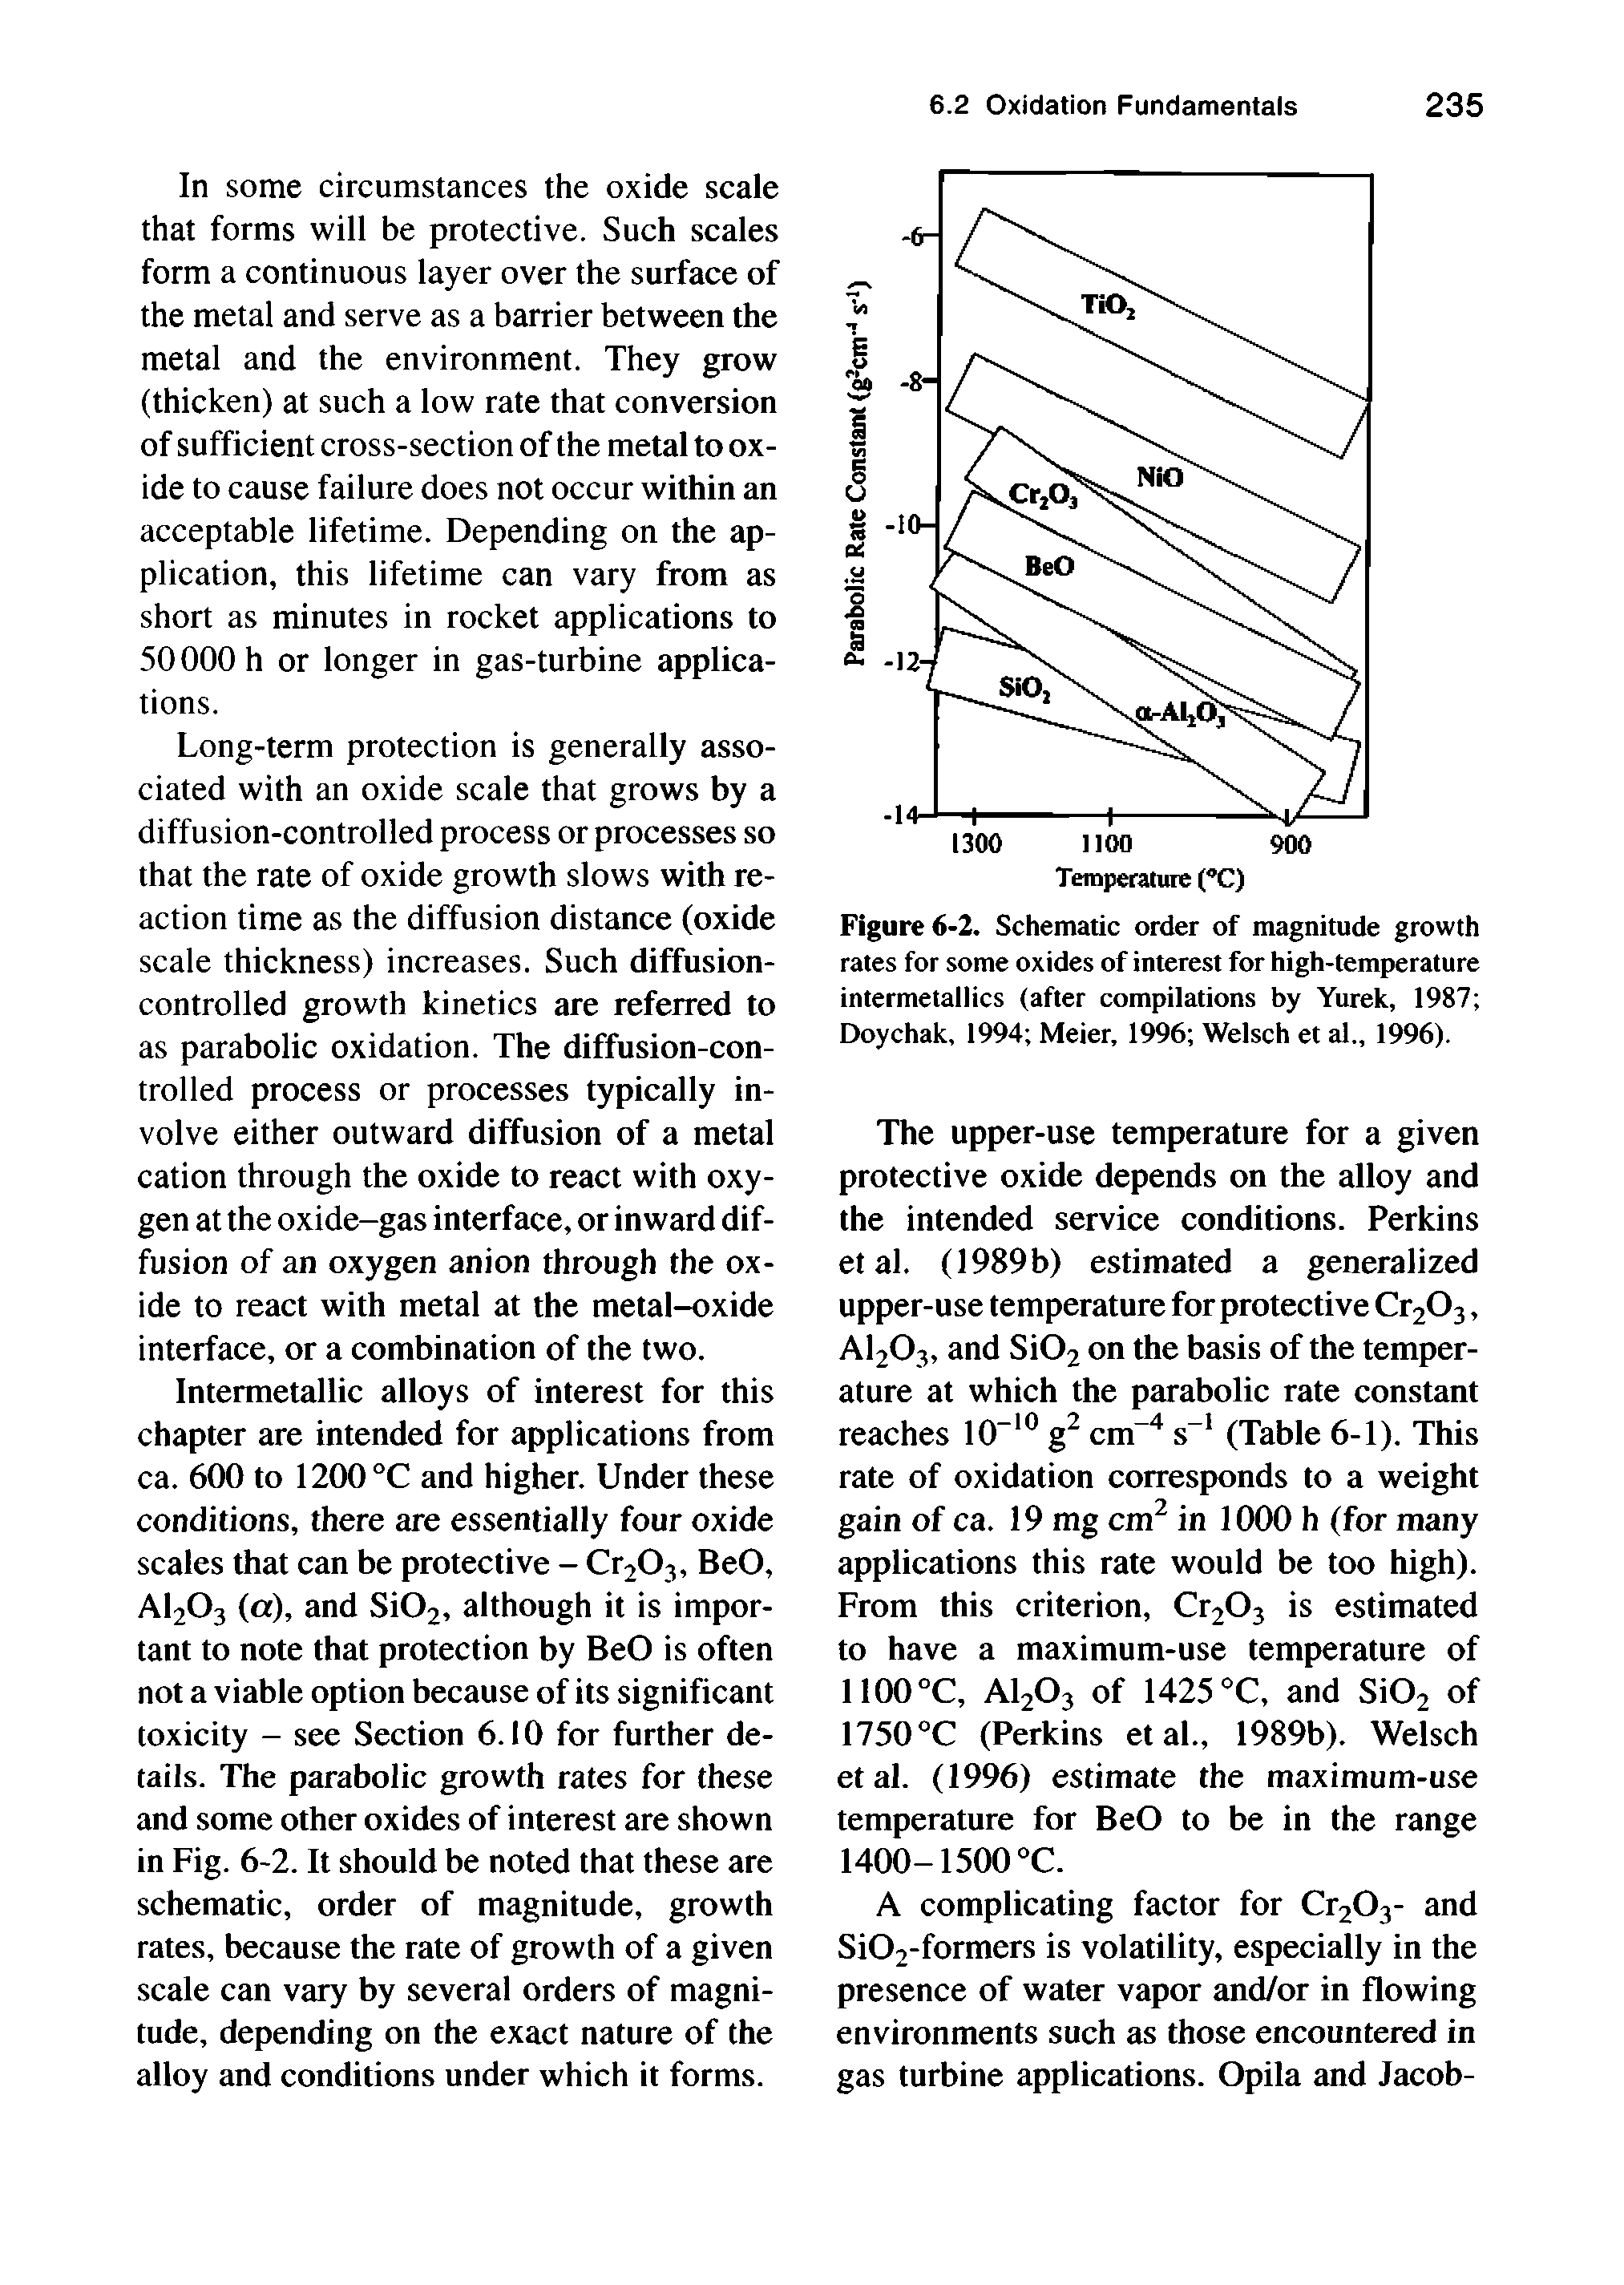 Figure 6-2. Schematic order of magnitude growth rates for some oxides of interest for high-temperature intermetallics (after compilations by Yurek, 1987 Doychak, 1994 Meier, 1996 Welsch et al., 1996).